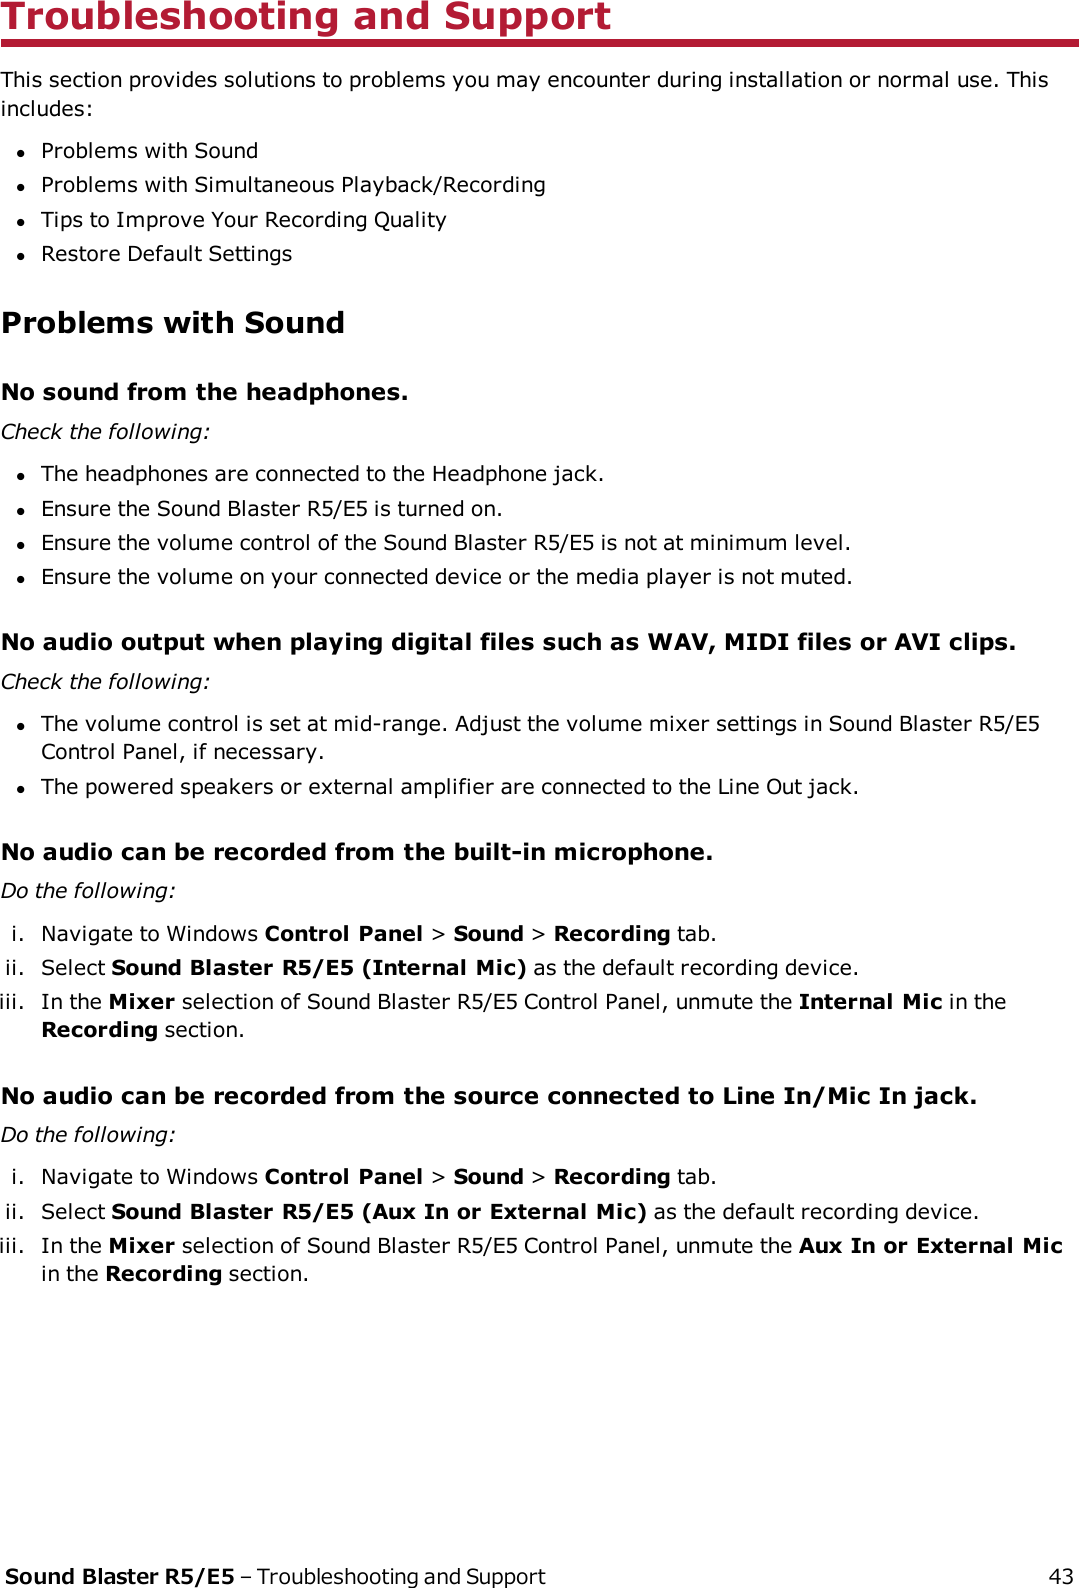 Troubleshooting and SupportThis section provides solutions to problems you may encounter during installation or normal use. Thisincludes:lProblems with SoundlProblems with Simultaneous Playback/RecordinglTips to Improve Your Recording QualitylRestore Default SettingsProblems with SoundNo sound from the headphones.Check the following:lThe headphones are connected to the Headphone jack.lEnsure the Sound Blaster R5/E5 is turned on.lEnsure the volume control of the Sound Blaster R5/E5 is not at minimum level.lEnsure the volume on your connected device or the media player is not muted.No audio output when playing digital files such as WAV, MIDI files or AVI clips.Check the following:lThe volume control is set at mid-range. Adjust the volume mixer settings in Sound Blaster R5/E5Control Panel, if necessary.lThe powered speakers or external amplifier are connected to the Line Out jack.No audio can be recorded from the built-in microphone.Do the following:i. Navigate to Windows Control Panel &gt;Sound &gt;Recording tab.ii. Select Sound Blaster R5/E5 (Internal Mic) as the default recording device.iii. In the Mixer selection of Sound Blaster R5/E5 Control Panel, unmute the Internal Mic in theRecording section.No audio can be recorded from the source connected to Line In/Mic In jack.Do the following:i. Navigate to Windows Control Panel &gt;Sound &gt;Recording tab.ii. Select Sound Blaster R5/E5 (Aux In or External Mic) as the default recording device.iii. In the Mixer selection of Sound Blaster R5/E5 Control Panel, unmute the Aux In or External Micin the Recording section.Sound Blaster R5/E5 – Troubleshooting and Support 43